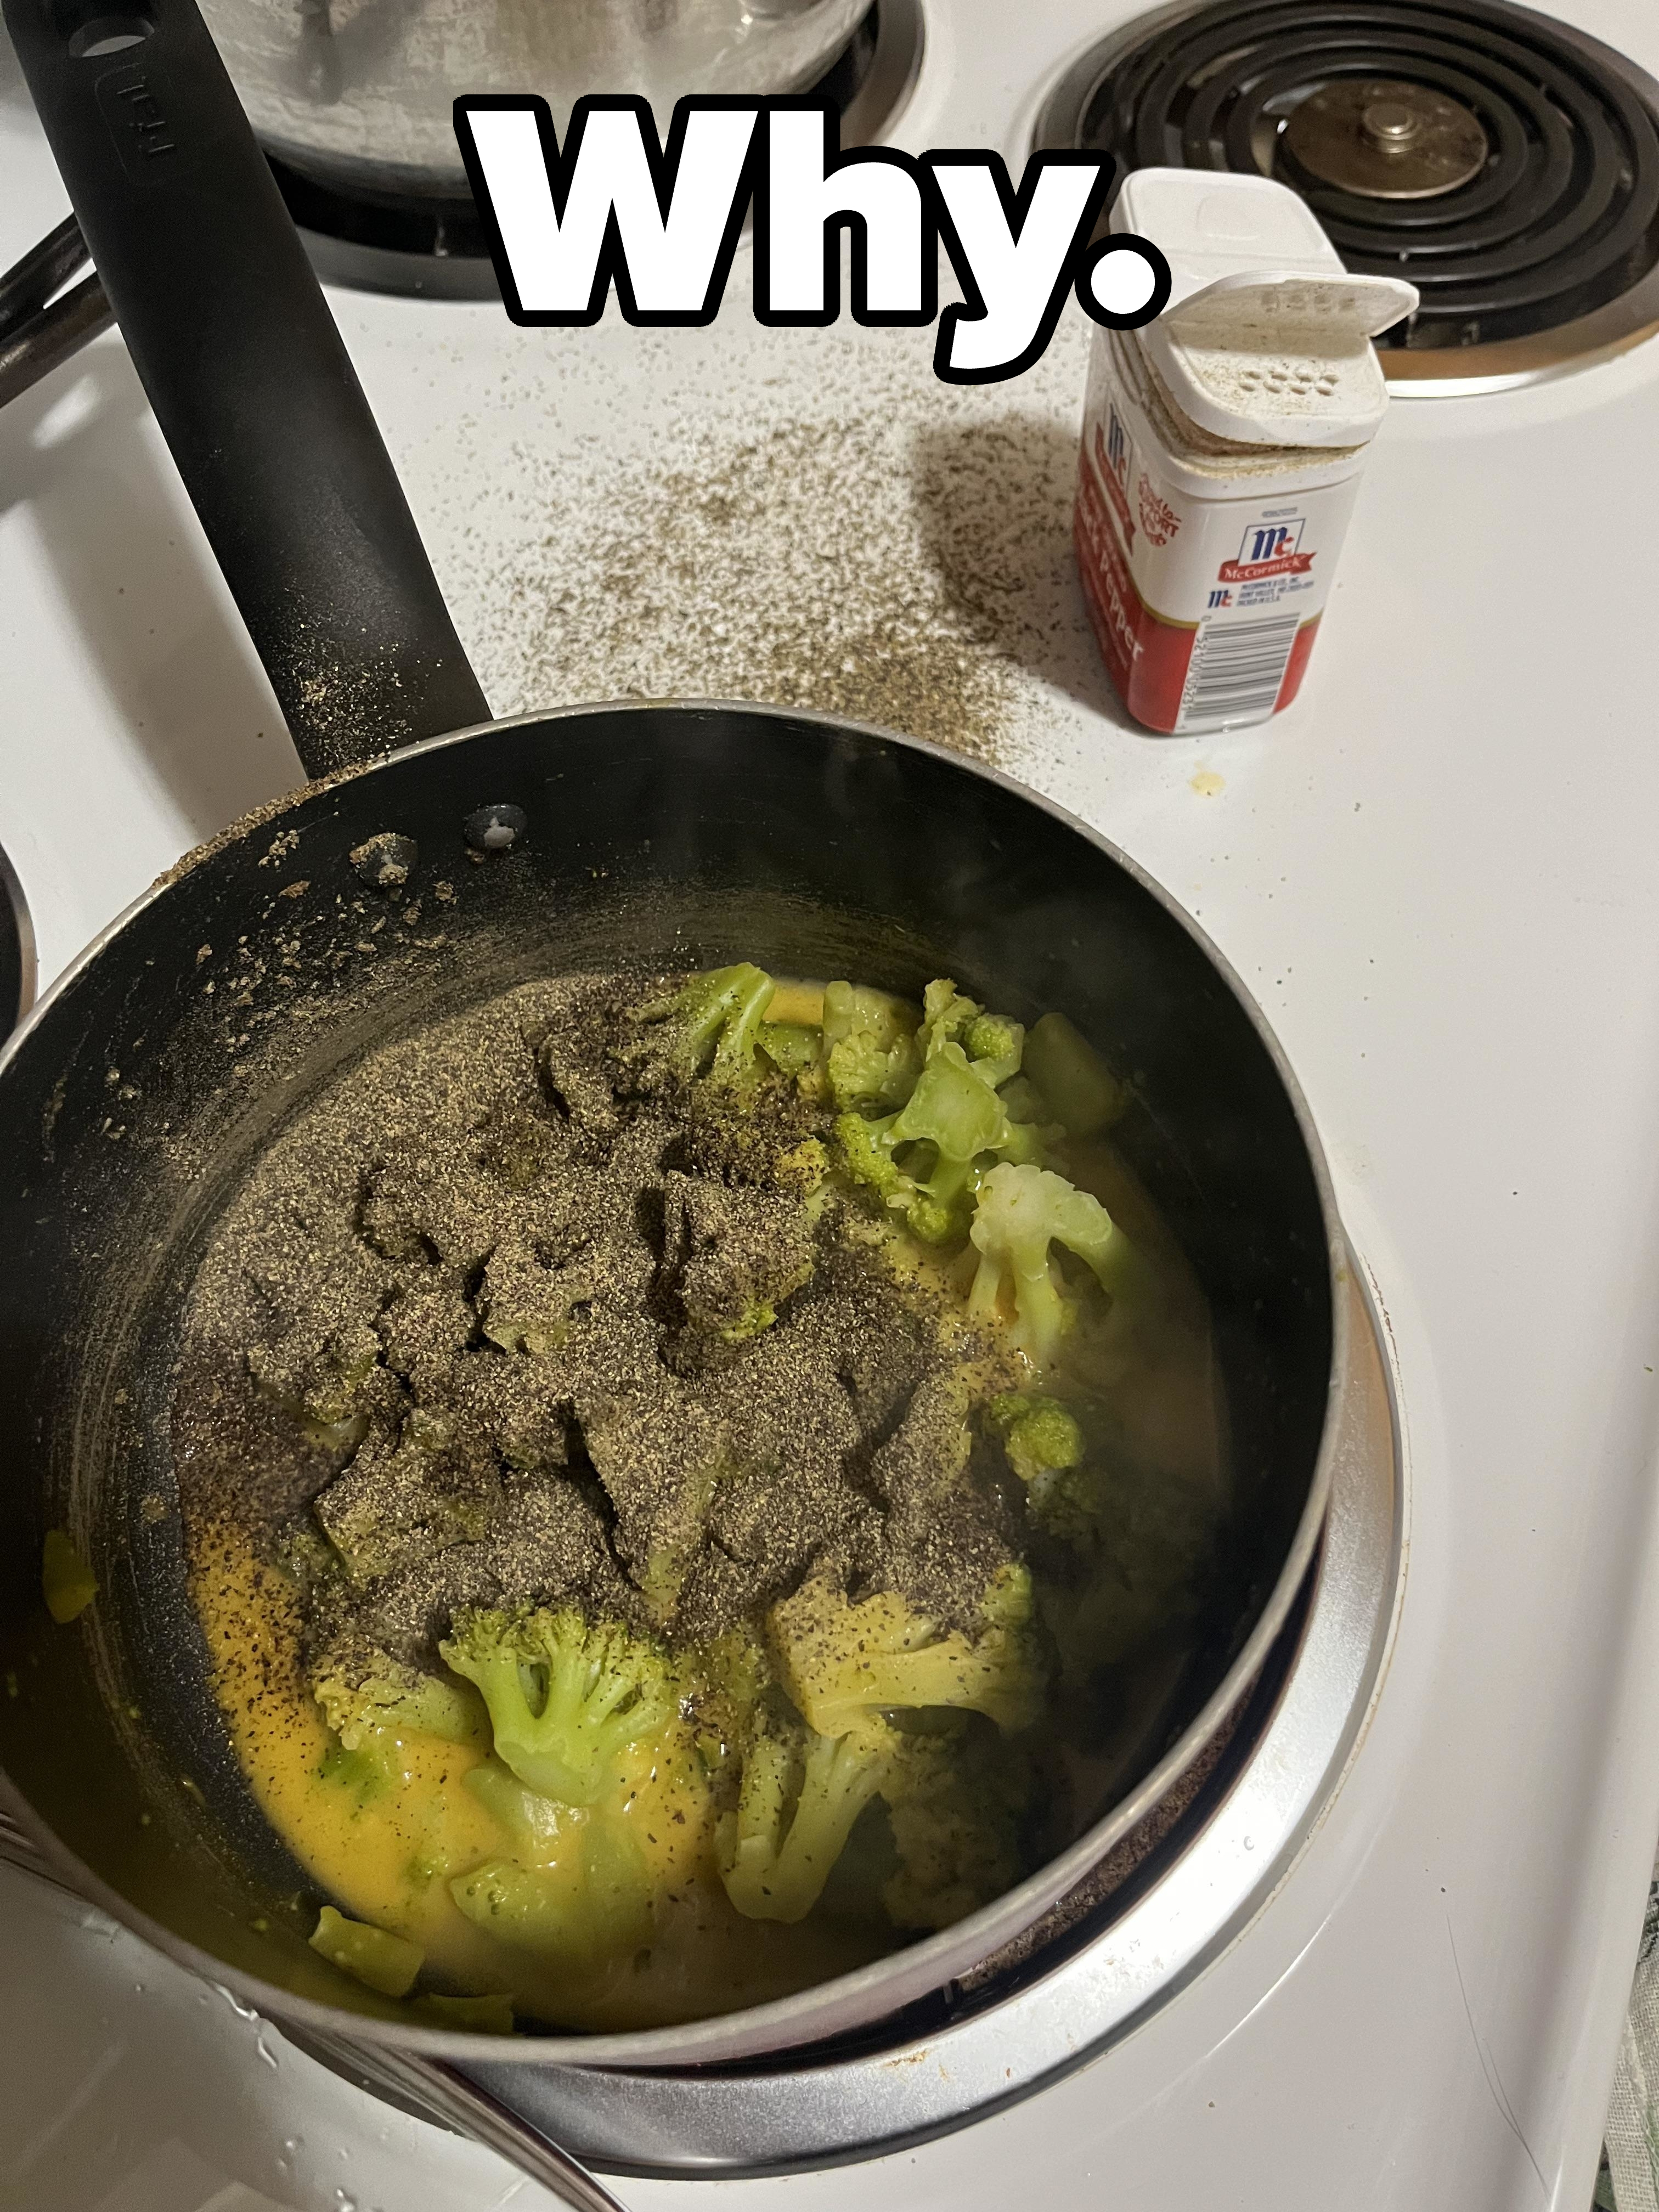 Cooking pot on stove with broccoli and spices, next to a carton of cooking cream